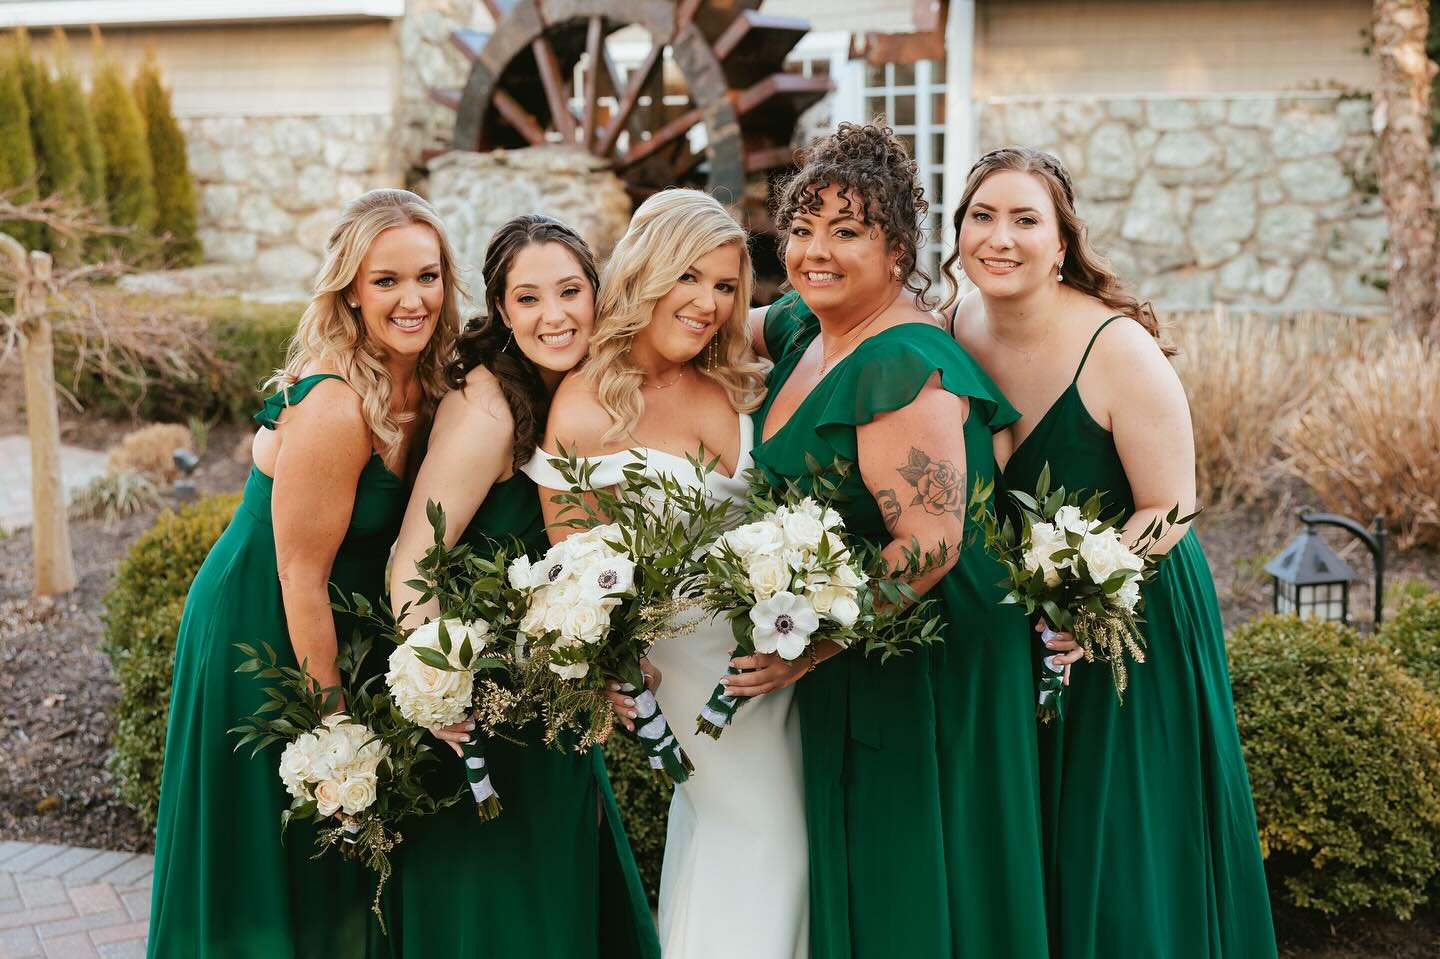 Surrounded by love, laughter, and an amazing bridal party. 💕

Dress: @Northforkforkbridal
Dj: @stylinsoundsd
Alterations: @kgalts
Florals: @malkmes_florist
Hair/makeup: @styles_bymarcella
Venue: @watermillcaterers

#LongIslandWeddingPhotographer
#LI